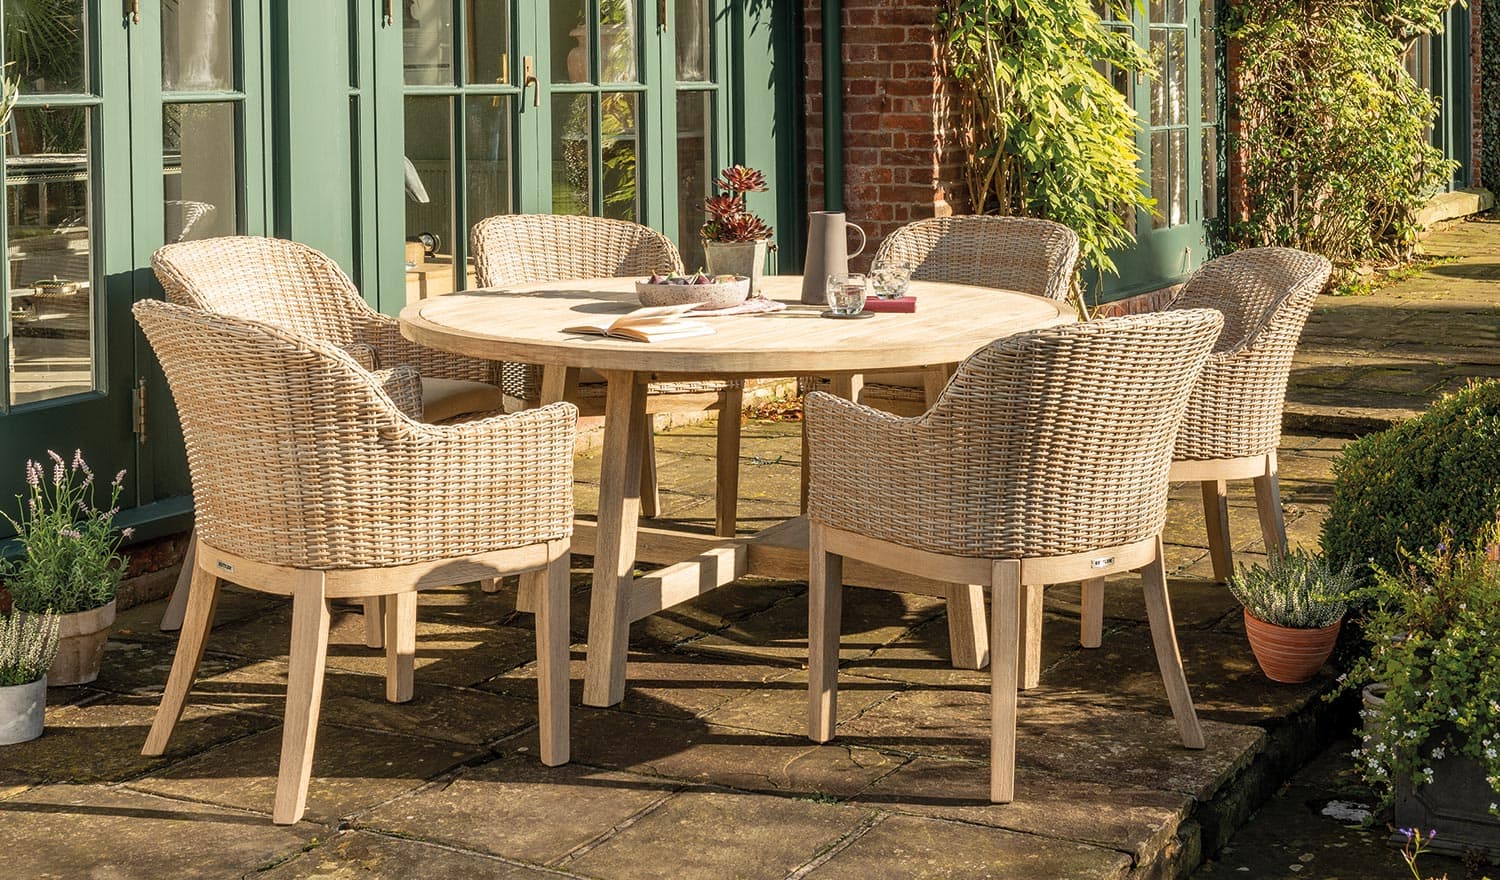 Cora 120cm Round Dining Table 4 Seater, Round Wooden Table And Chairs For Garden